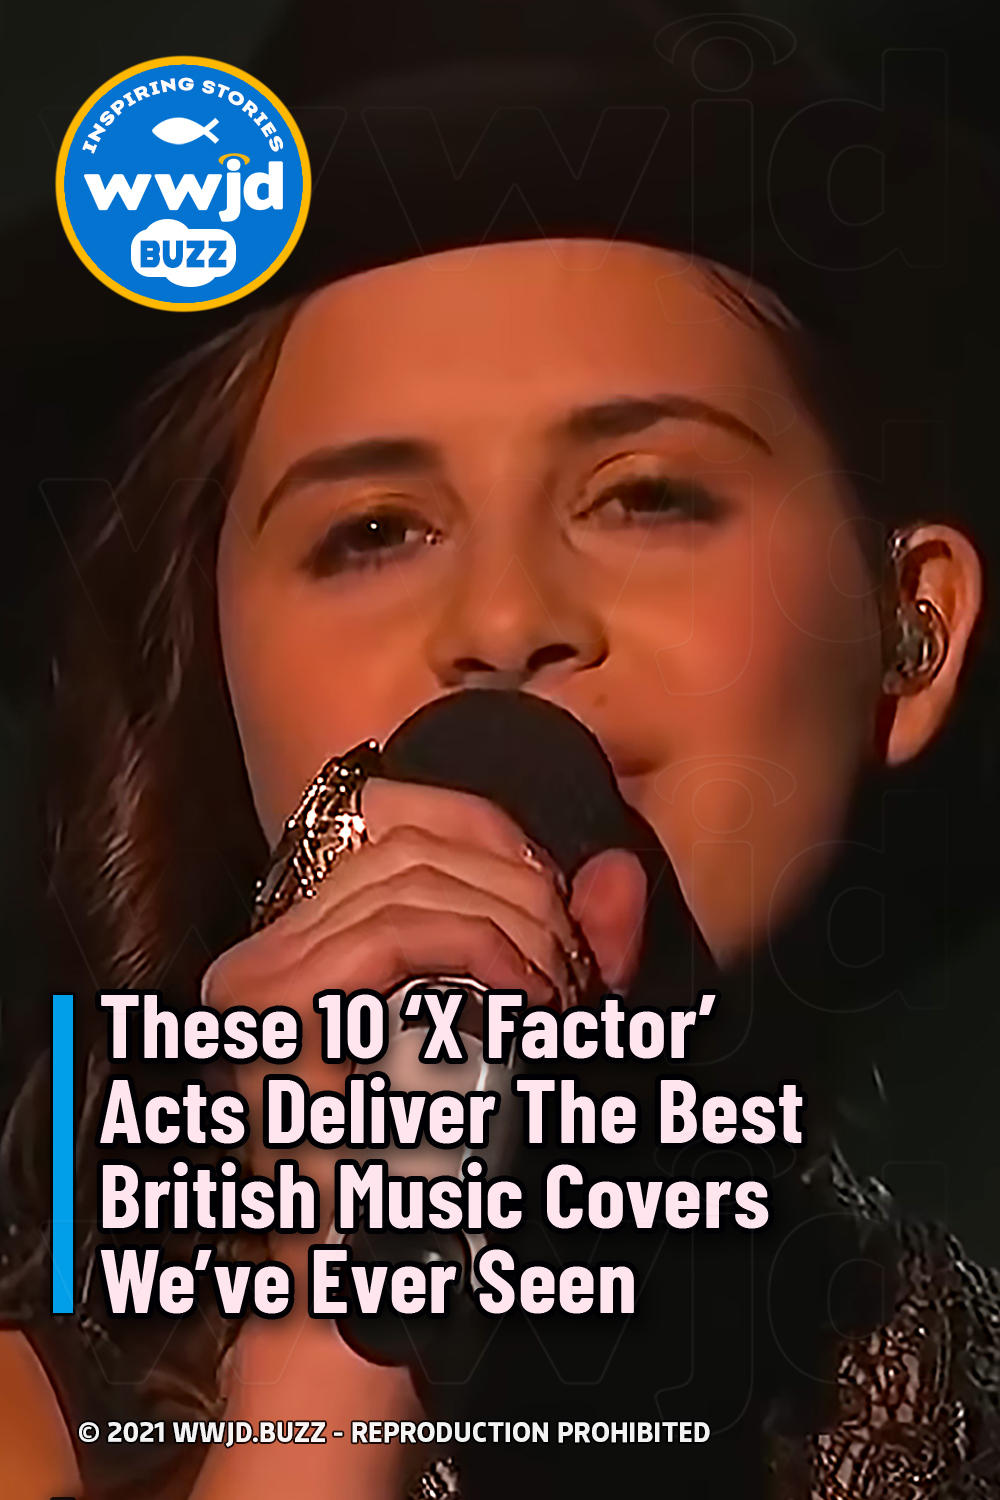 These 10 \'X Factor\' Acts Deliver The Best British Music Covers We\'ve Ever Seen